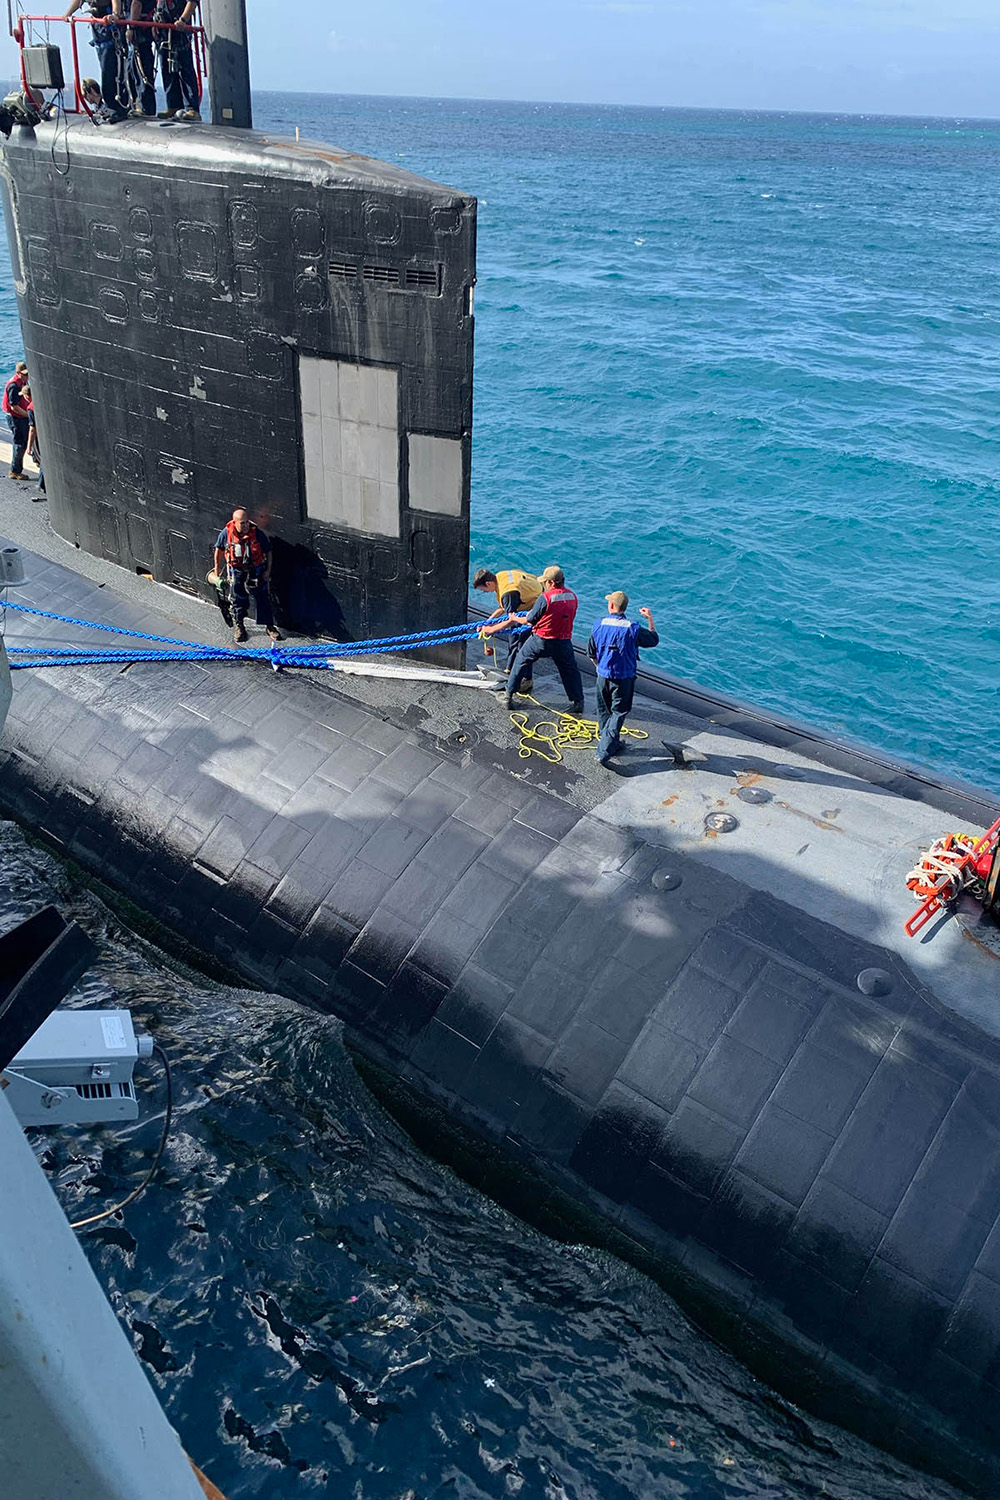 Sailors assigned to the Los Angeles-class fast-attack submarine USS Pasadena moor alongside the Arleigh Burke-class guided missile destroyer USS Cole during a port visit to Ocho Rios, Jamaica, July 28, 2023. © Navy